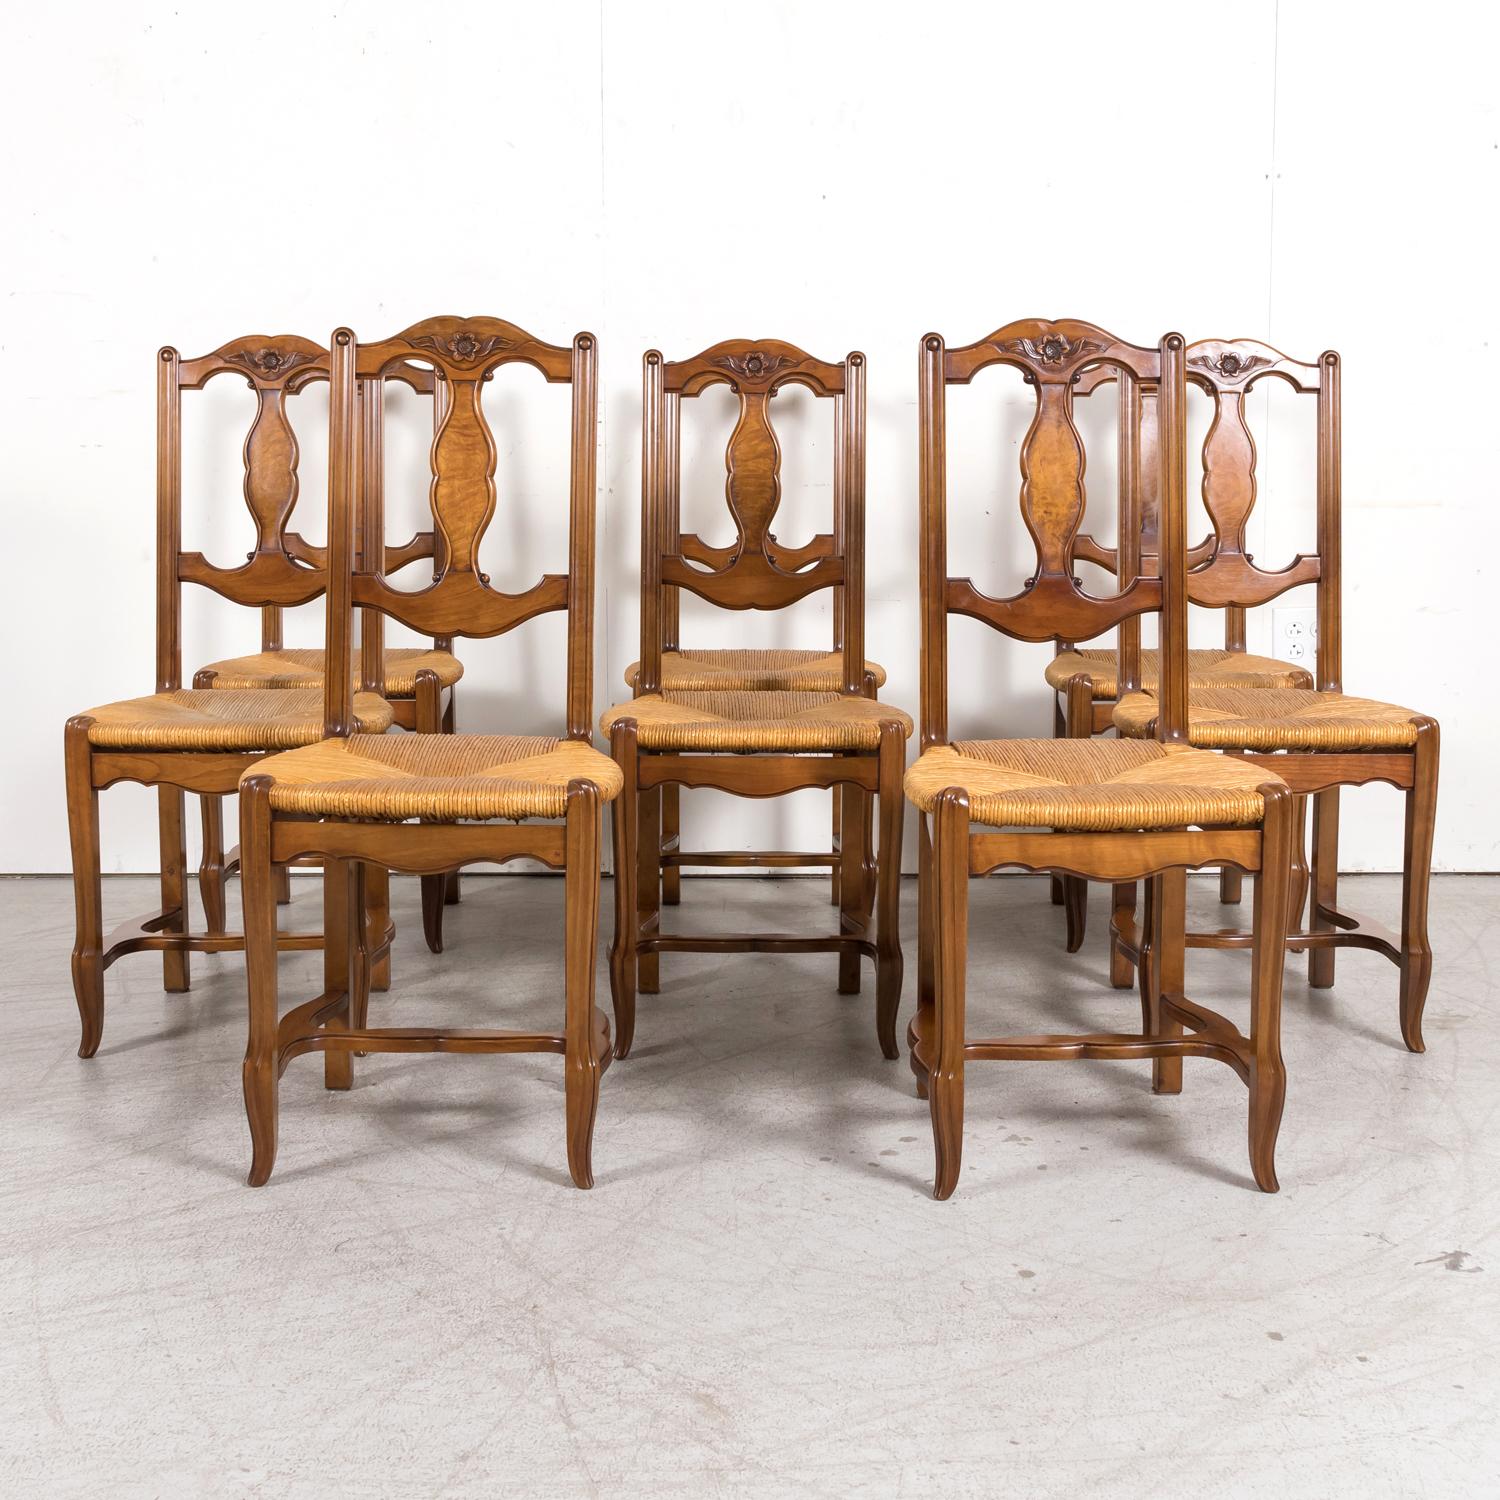 A set of eight 19th century antique Country French Louis XV style carved dining side chairs from Normandy, circa 1890s. Handcrafted in walnut, each of these antique dining chairs features a carved top rail having floral motifs with vertical slats.